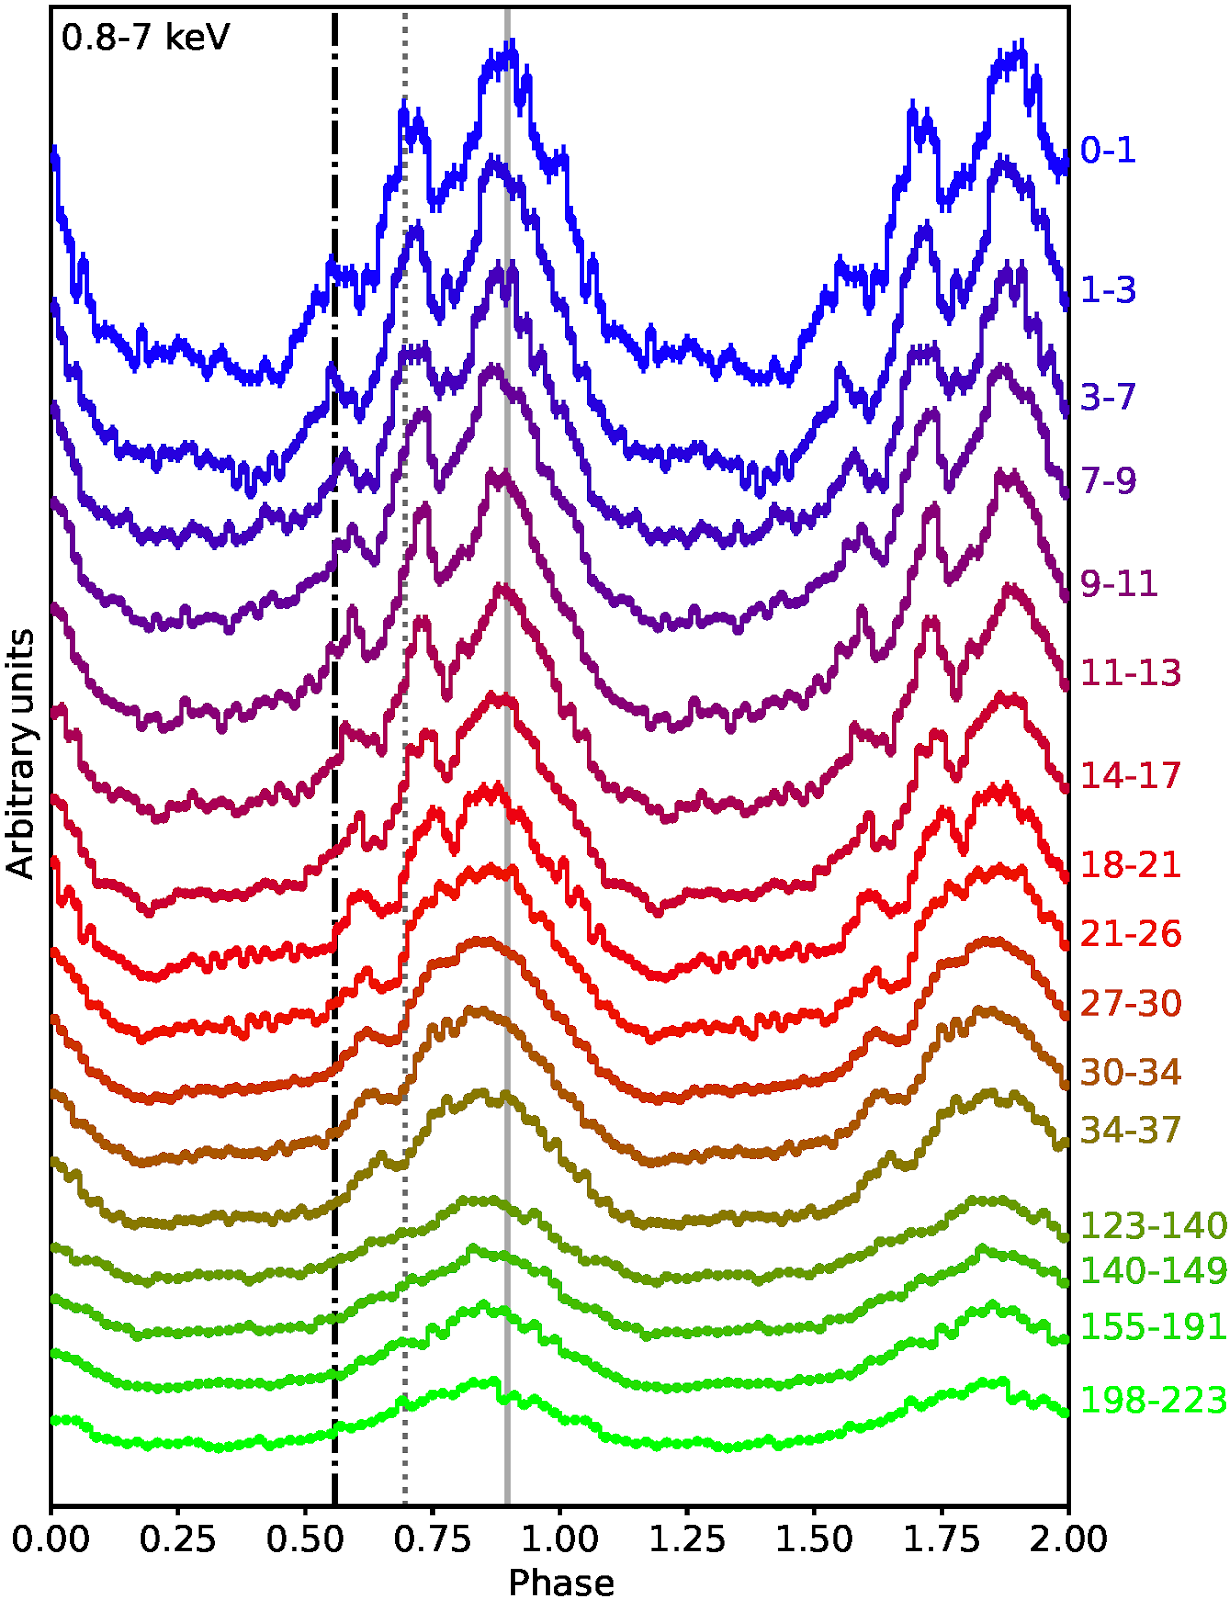 Soft X-ray pulse profiles of SGR 1830-0645 throughout the outburst as derived with NICER (numbers to the right of Figure are days from outburst onset). Two rotational cycles are shown for clarity. The dash-dotted, dotted, and solid vertical lines are the centroids of the peaks as derived during the first day of NICER observations. Just by eye, one can clearly discern a shift in pulse peaks in the direction to simplify the profile into a sinusoidal form. This phenomenon has not been observed in any magnetar before.